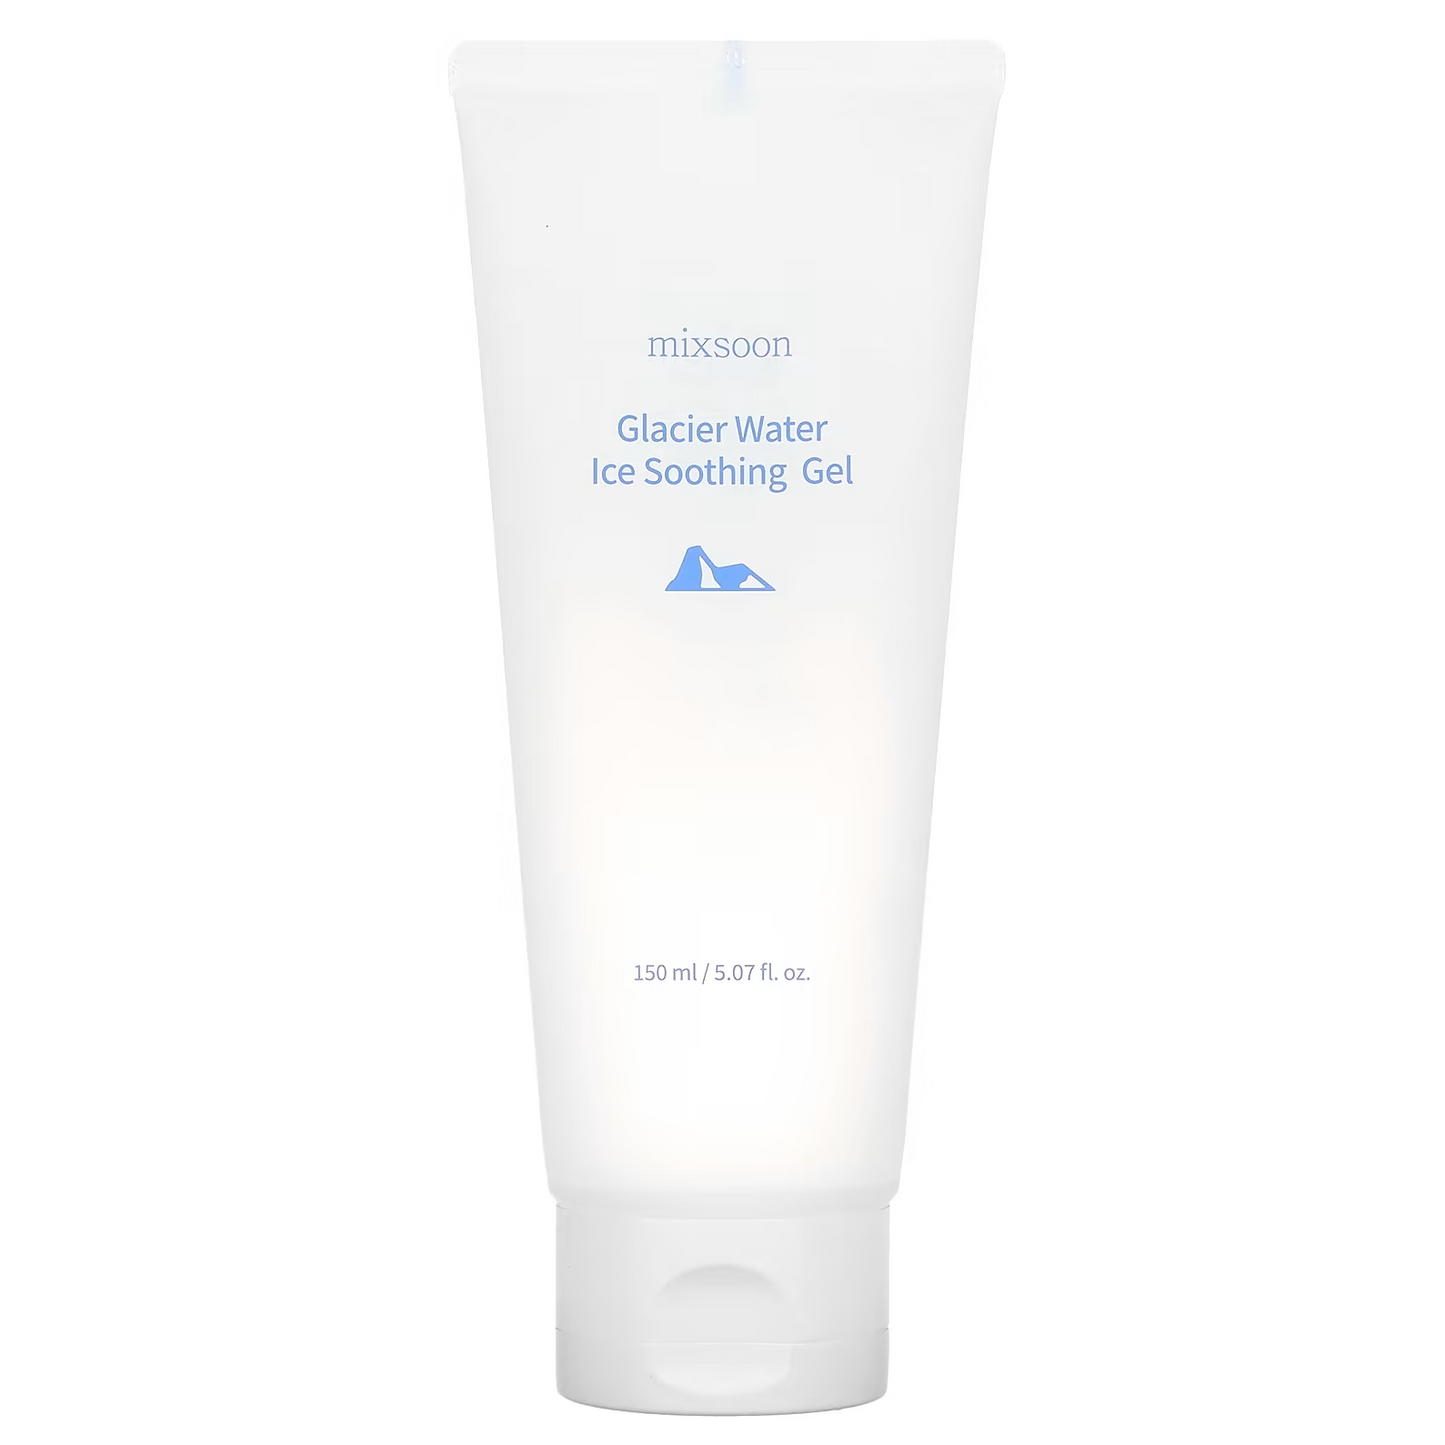 mixsoon - Glacier Water Ice Soothing Gel